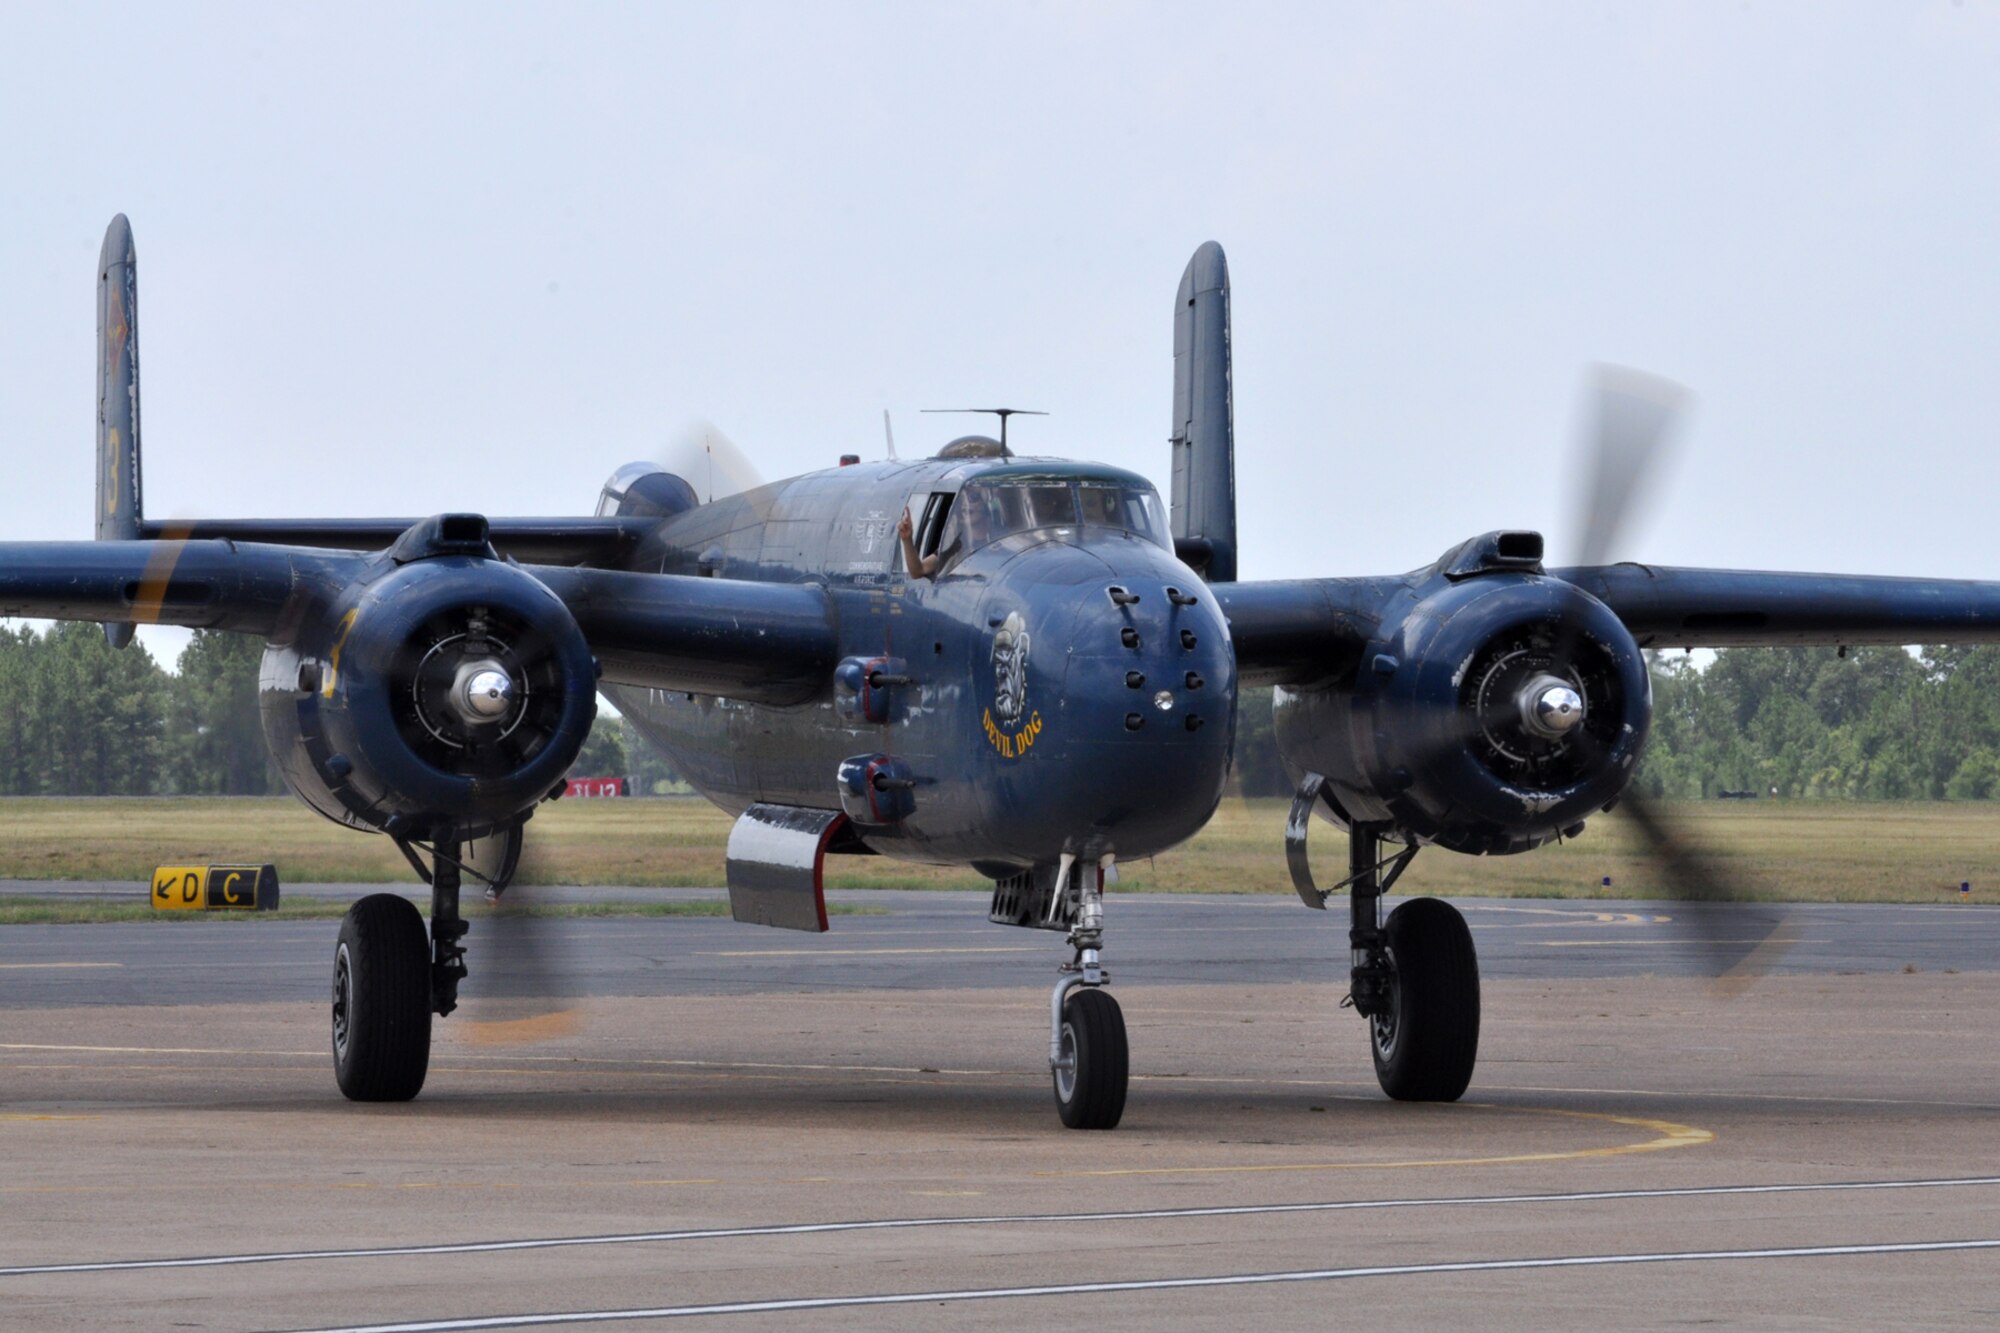 A B-25, piloted by Beth Jenkins, taxis in after performing at the “Wings Over Tyler Air Show” at the Tyler Pound Regional Airport in Tyler, Texas, June 3, 2011. Jenkins is the owner of a flight school in Georgetown, Texas, and the only female performer at the air show. She has more than 20,000 flying hours, 19,000 of those training pilots. At her side as co-pilot during the performance was Mark Frederick, who hails from Taylor, Texas. Jenkins plans to fly “Devil Dog,” the Marine version of the B-25 in more than 14 air shows this year. (U.S. Air Force photo/Tech. Sgt. Jeff Walston)